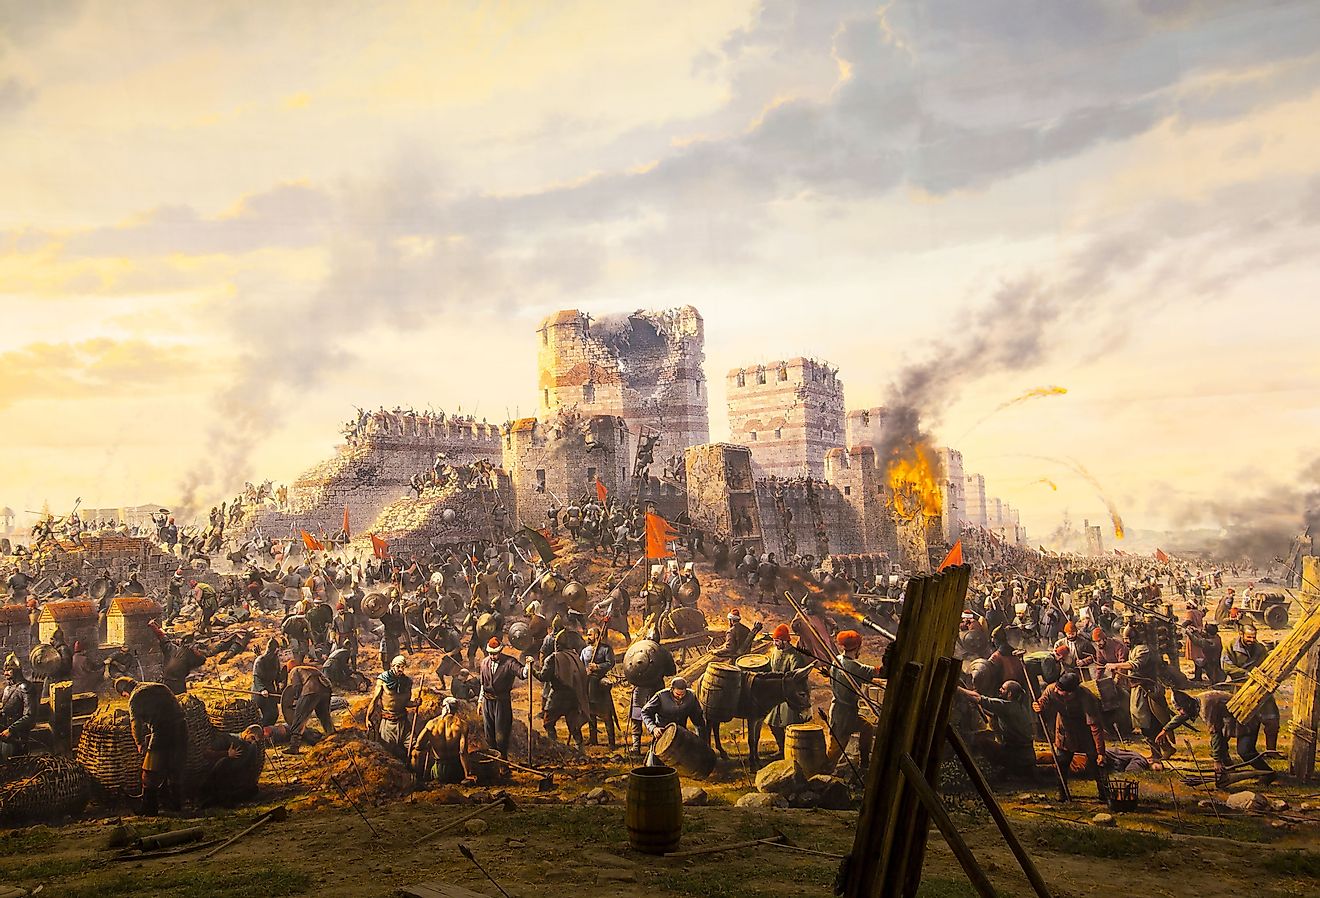 Illustration of the Fall of Constantinople in 1453. Image credit Lestertair via Shutterstock.